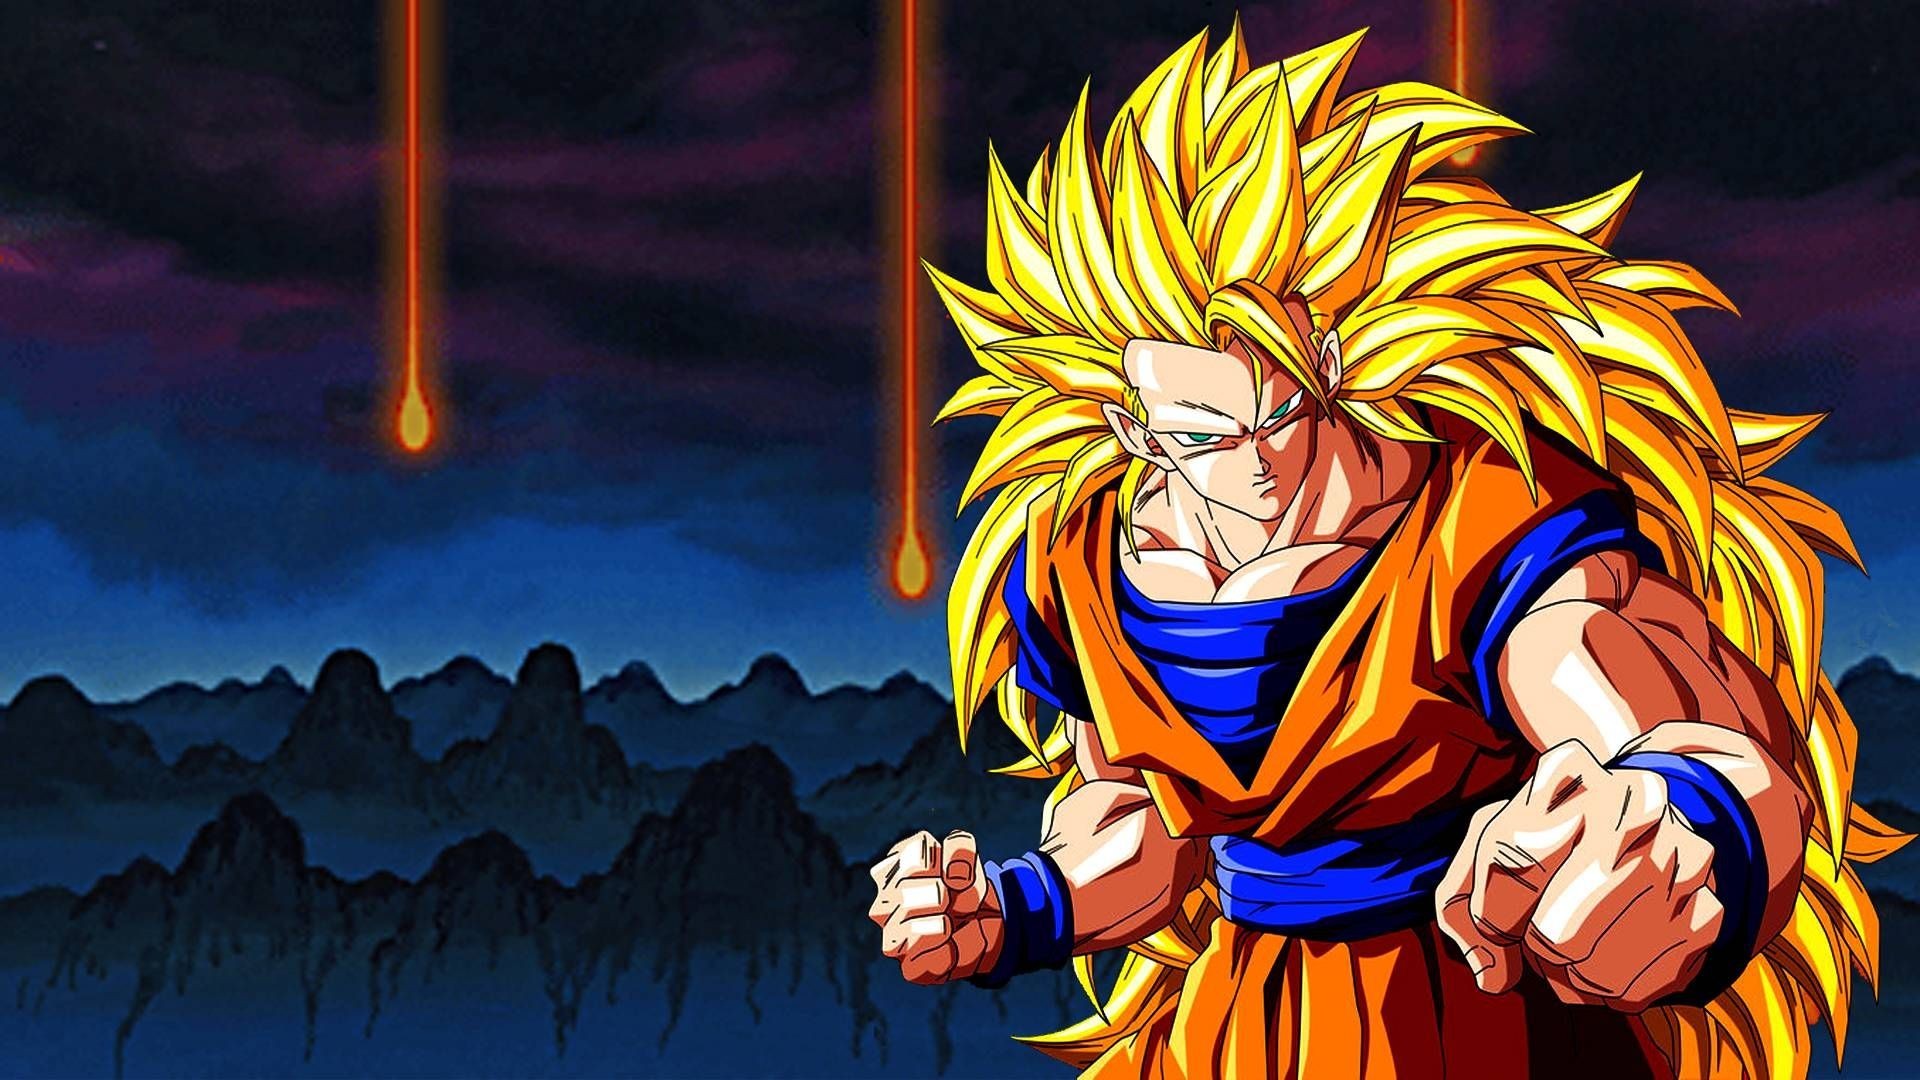 Desktop Wallpaper Goku SSJ3 with resolution 1920X1080 pixel. You can use this wallpaper as background for your desktop Computer Screensavers, Android or iPhone smartphones